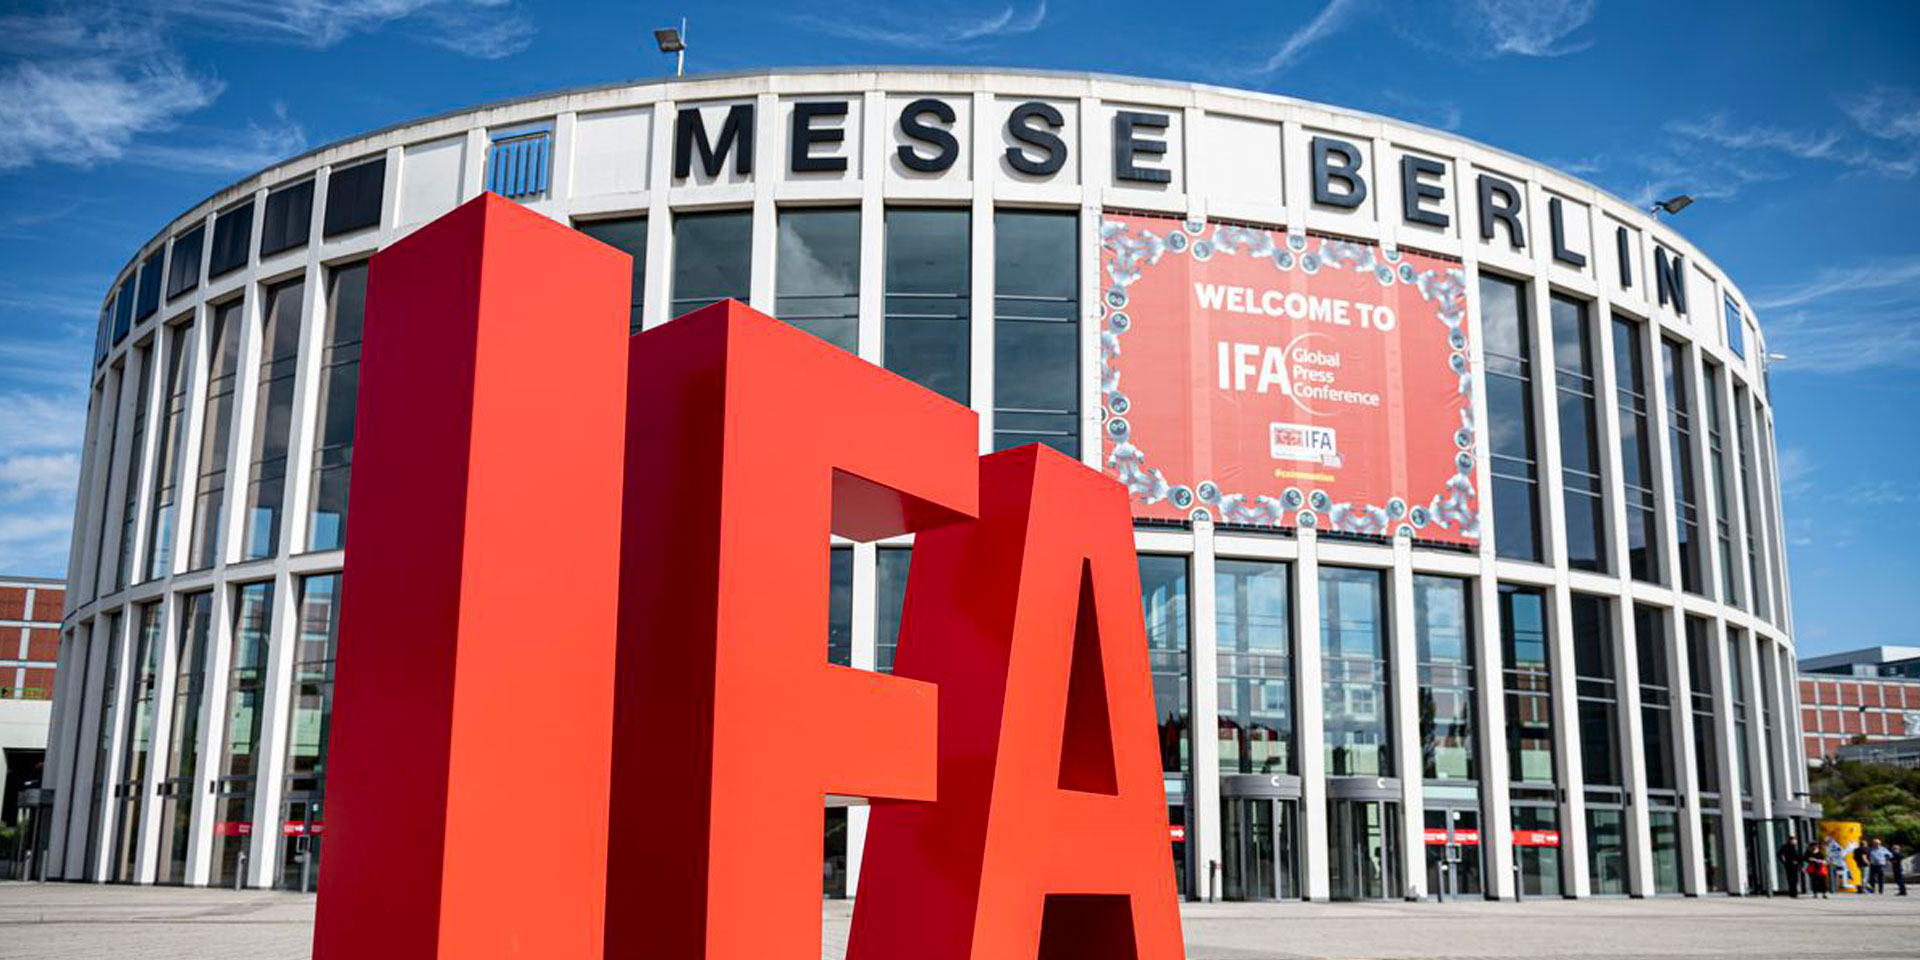 IFA 2022: THE BEGINNING OF THE BEST SHOW IN TECHNOLOGY